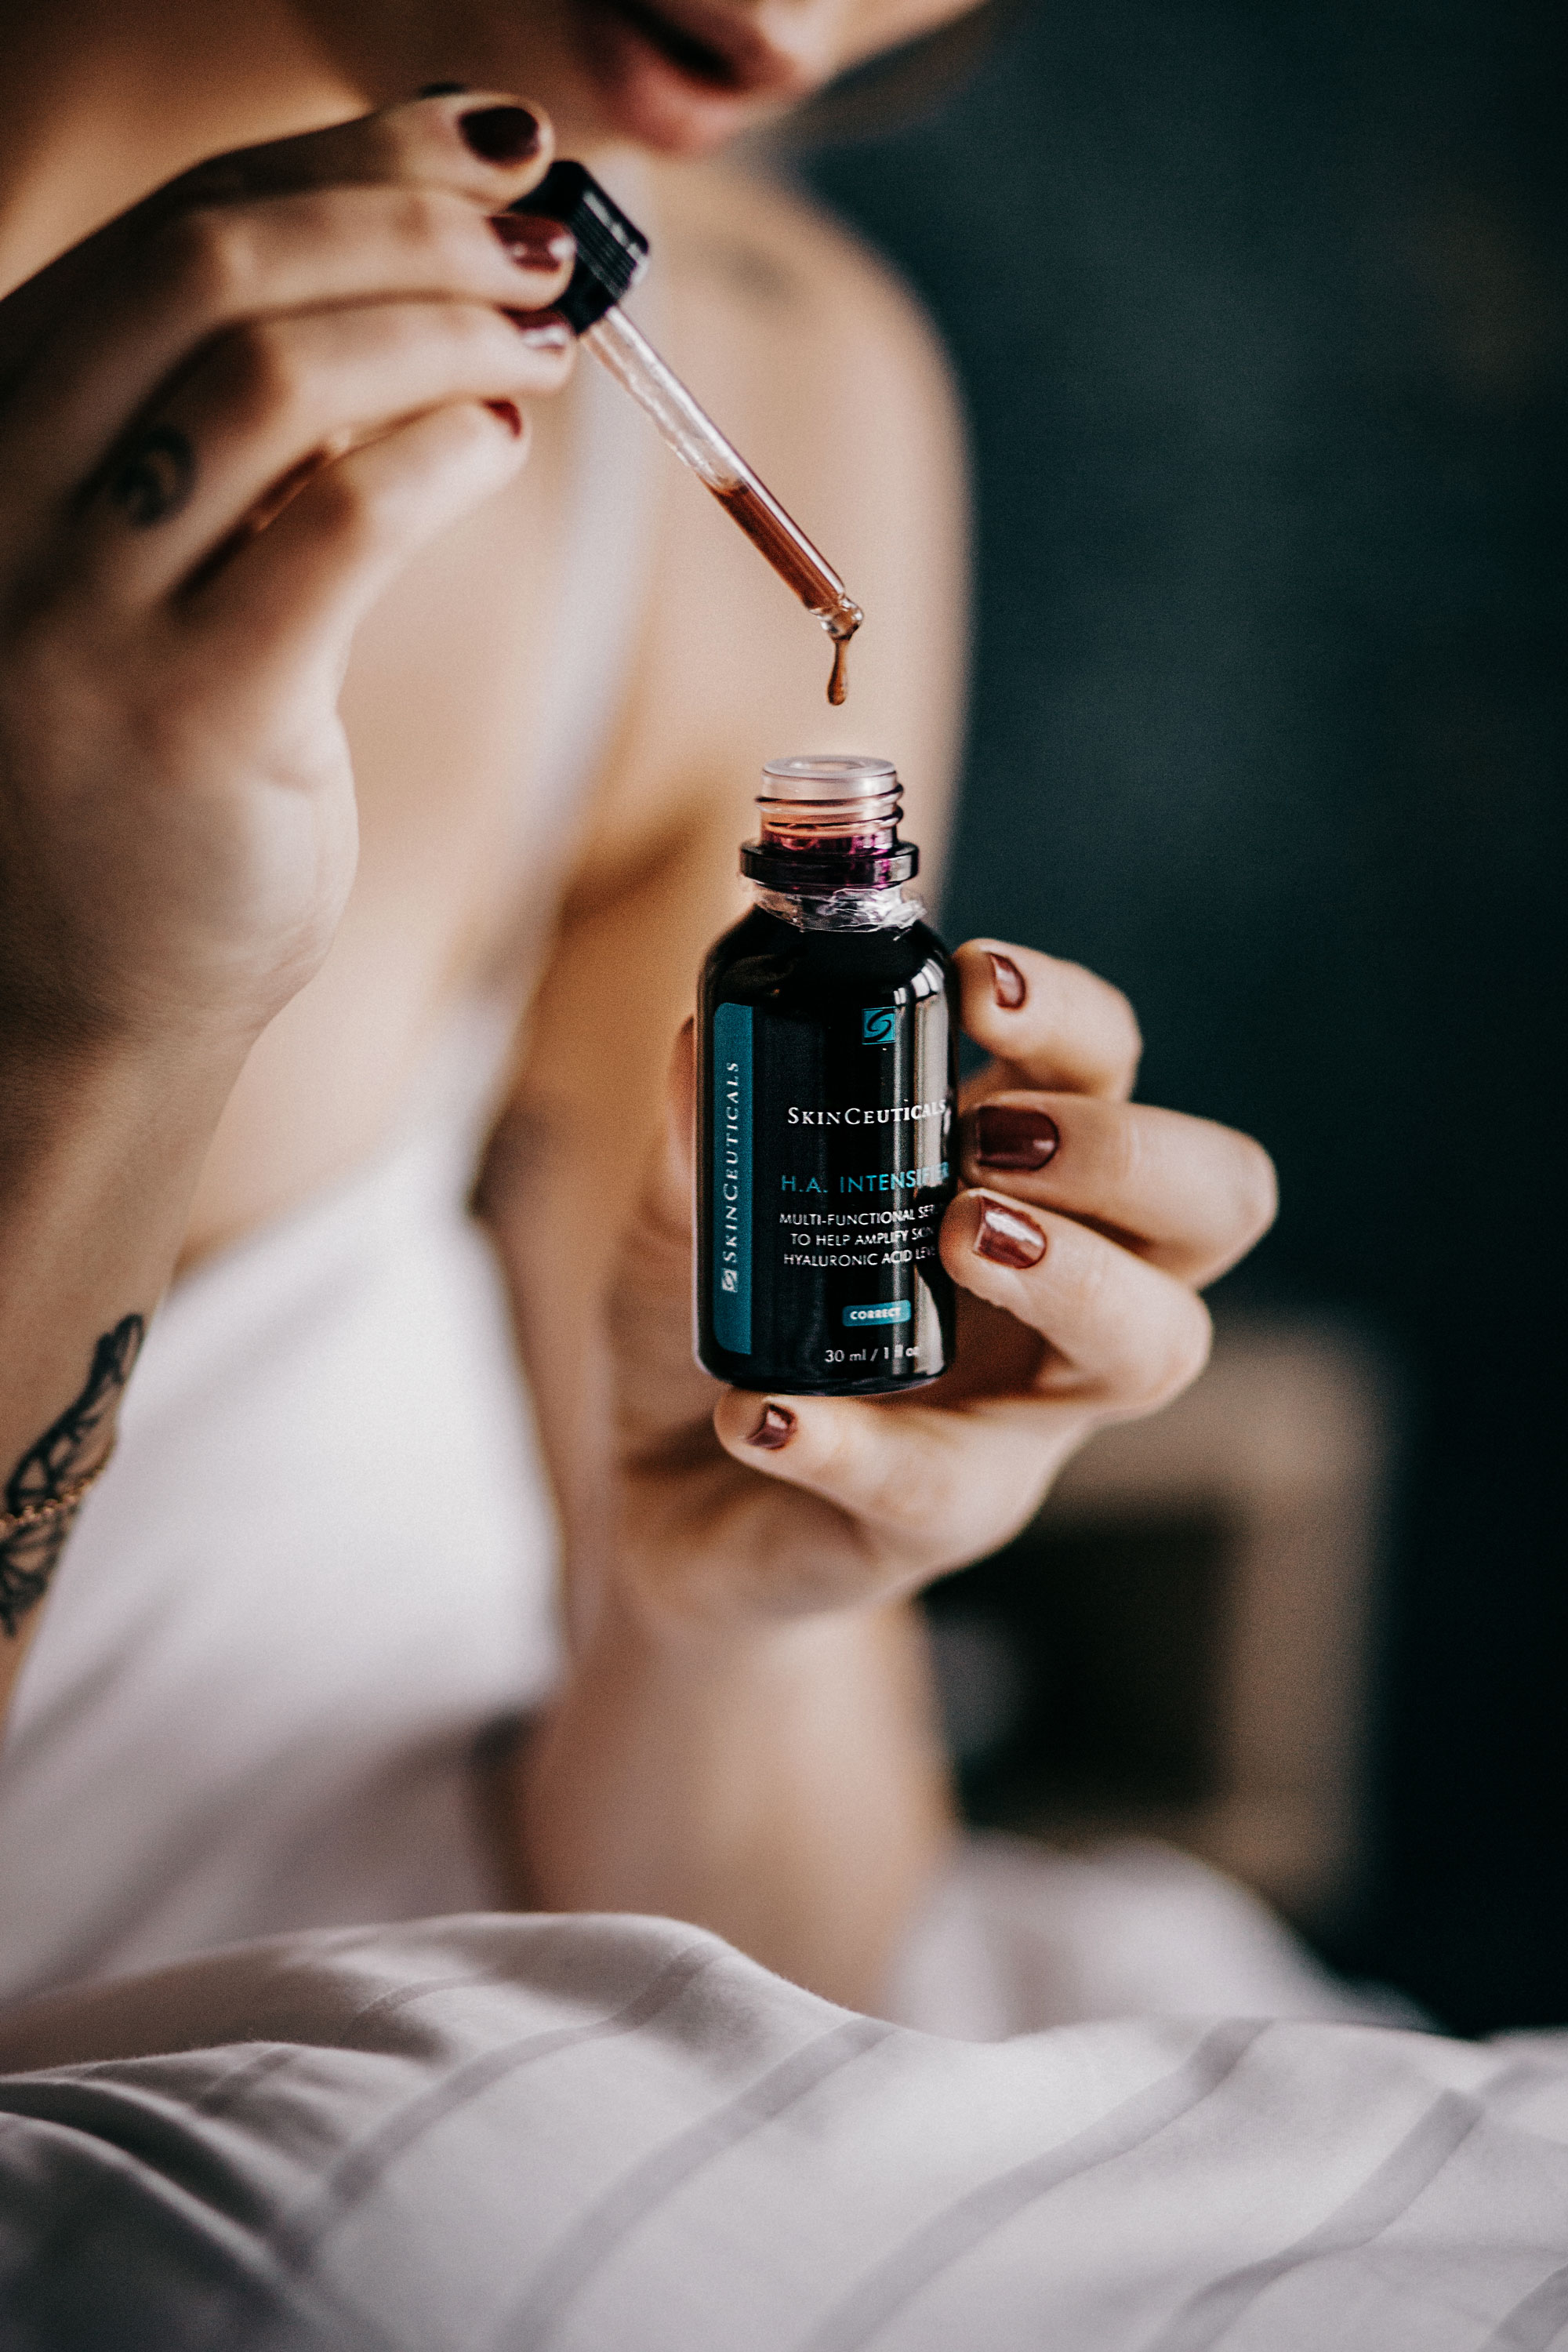 Review: Skinceuticals H.A. Intensifier Anti Aging Serum | editorial shooting style: hotel bed, natural, simple, white, beauty